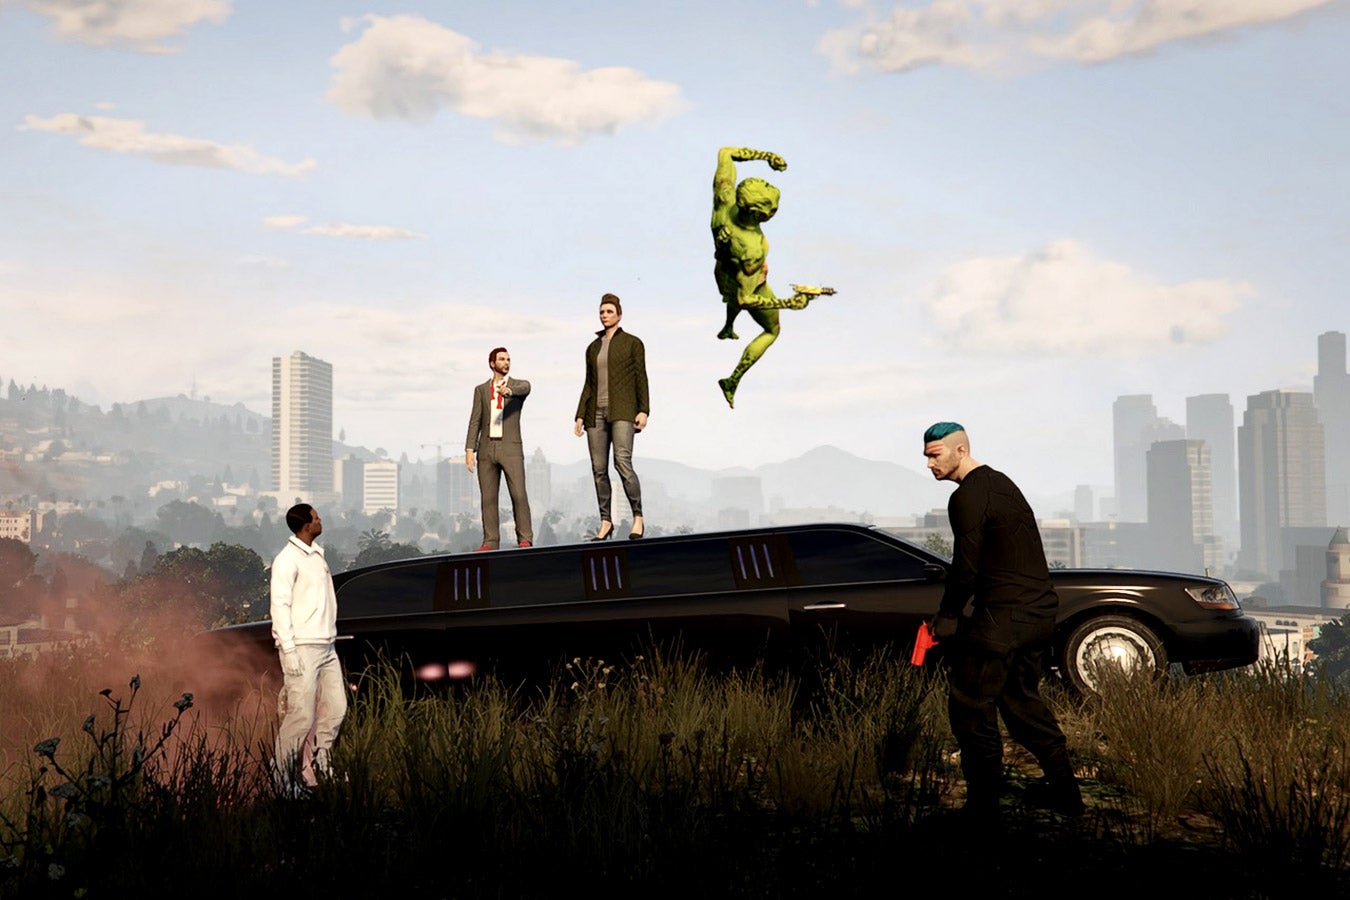 A shot from the movie has paused avatars standing on the roof of a limo against the skyline of Los Santos.